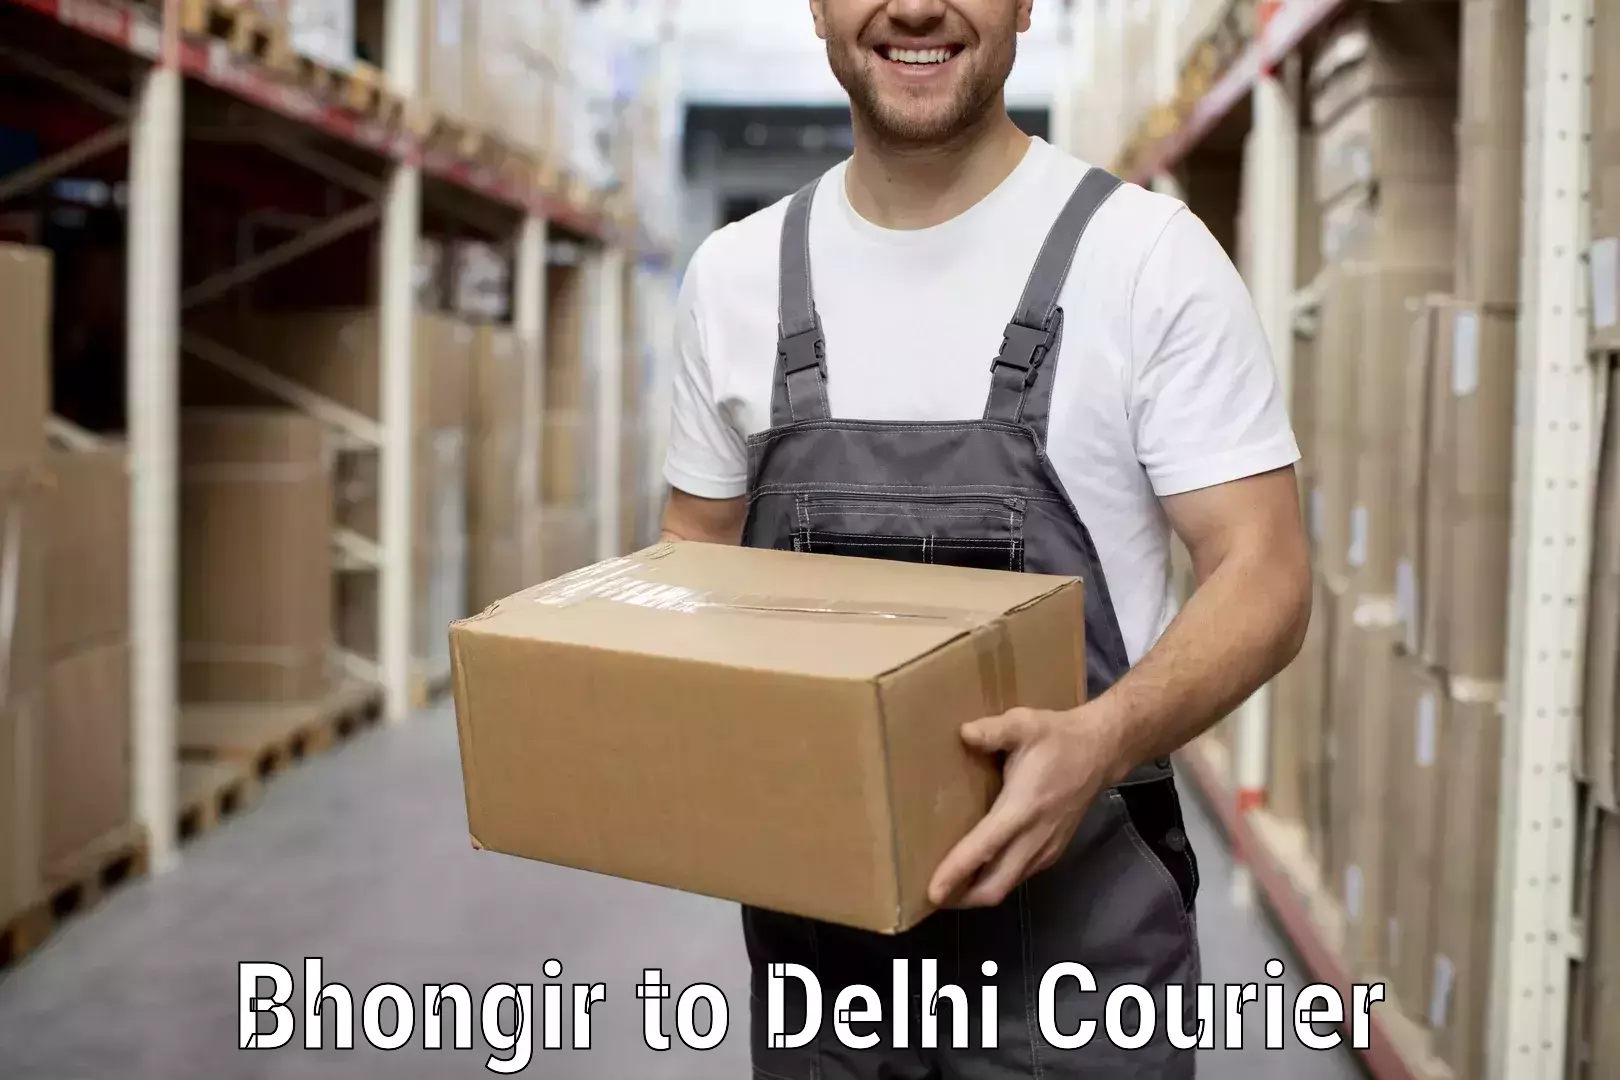 Residential moving experts Bhongir to Lodhi Road